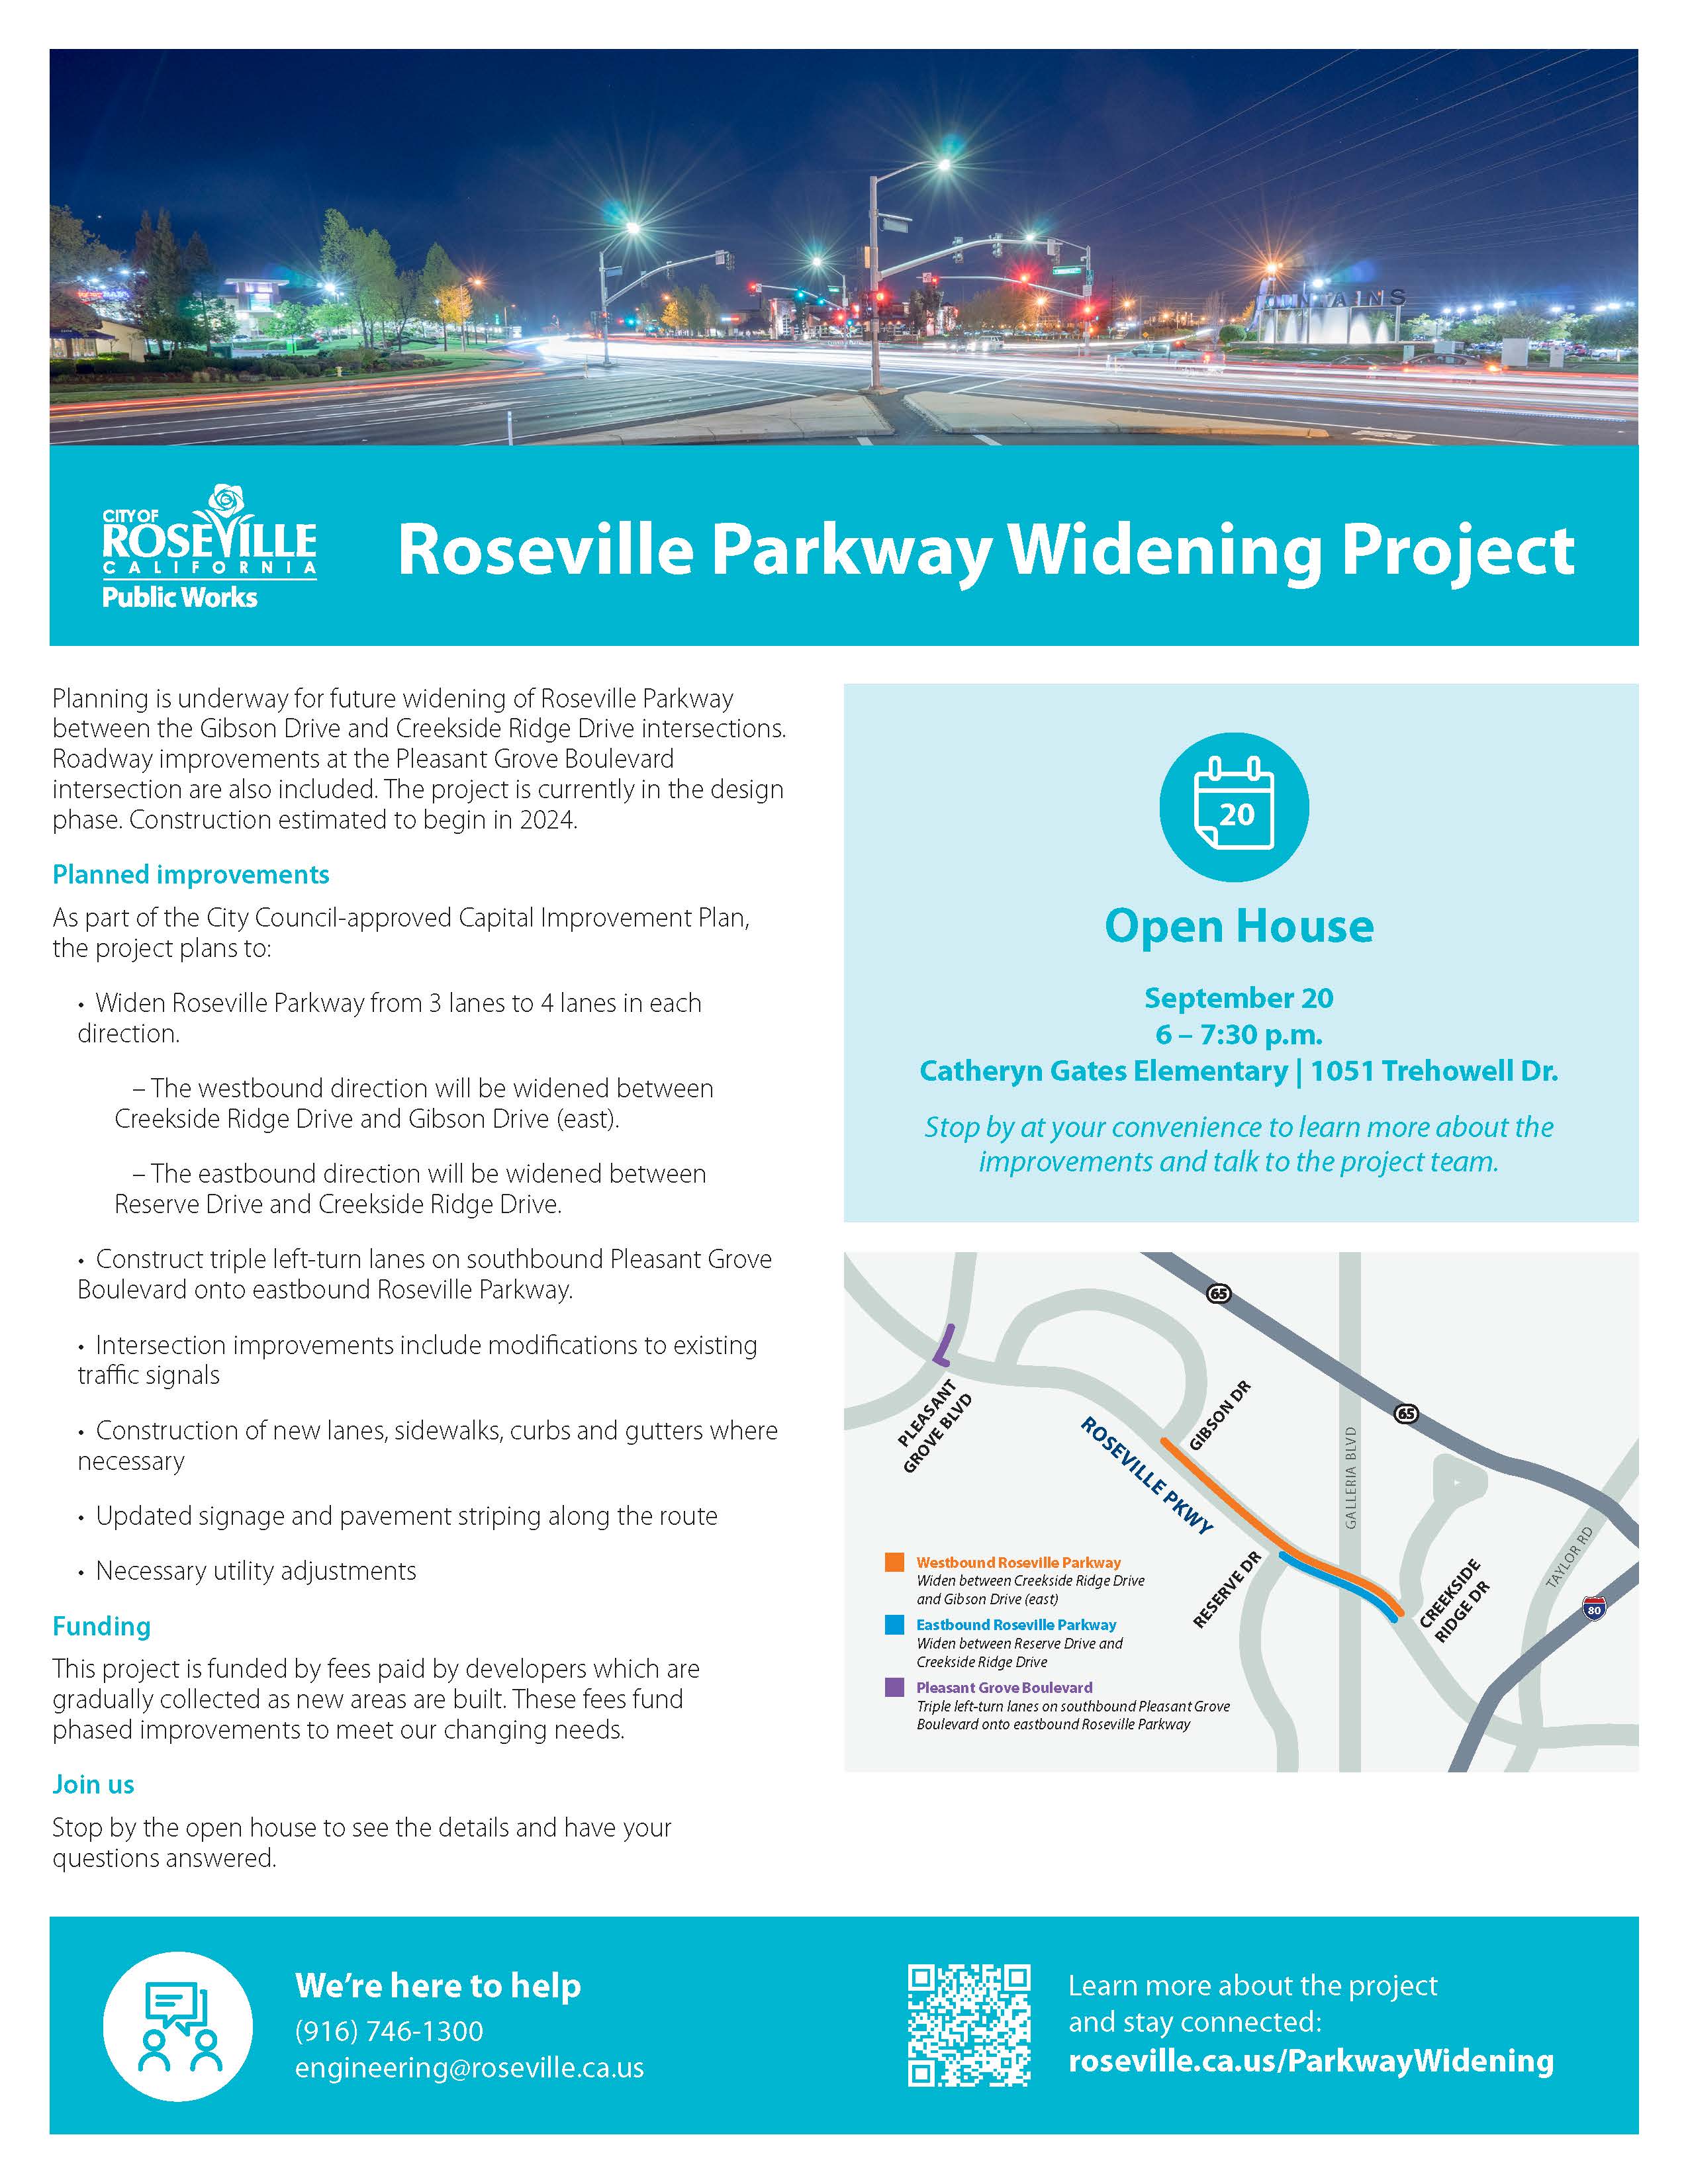 More information about "Roseville Parkway Widening Project"